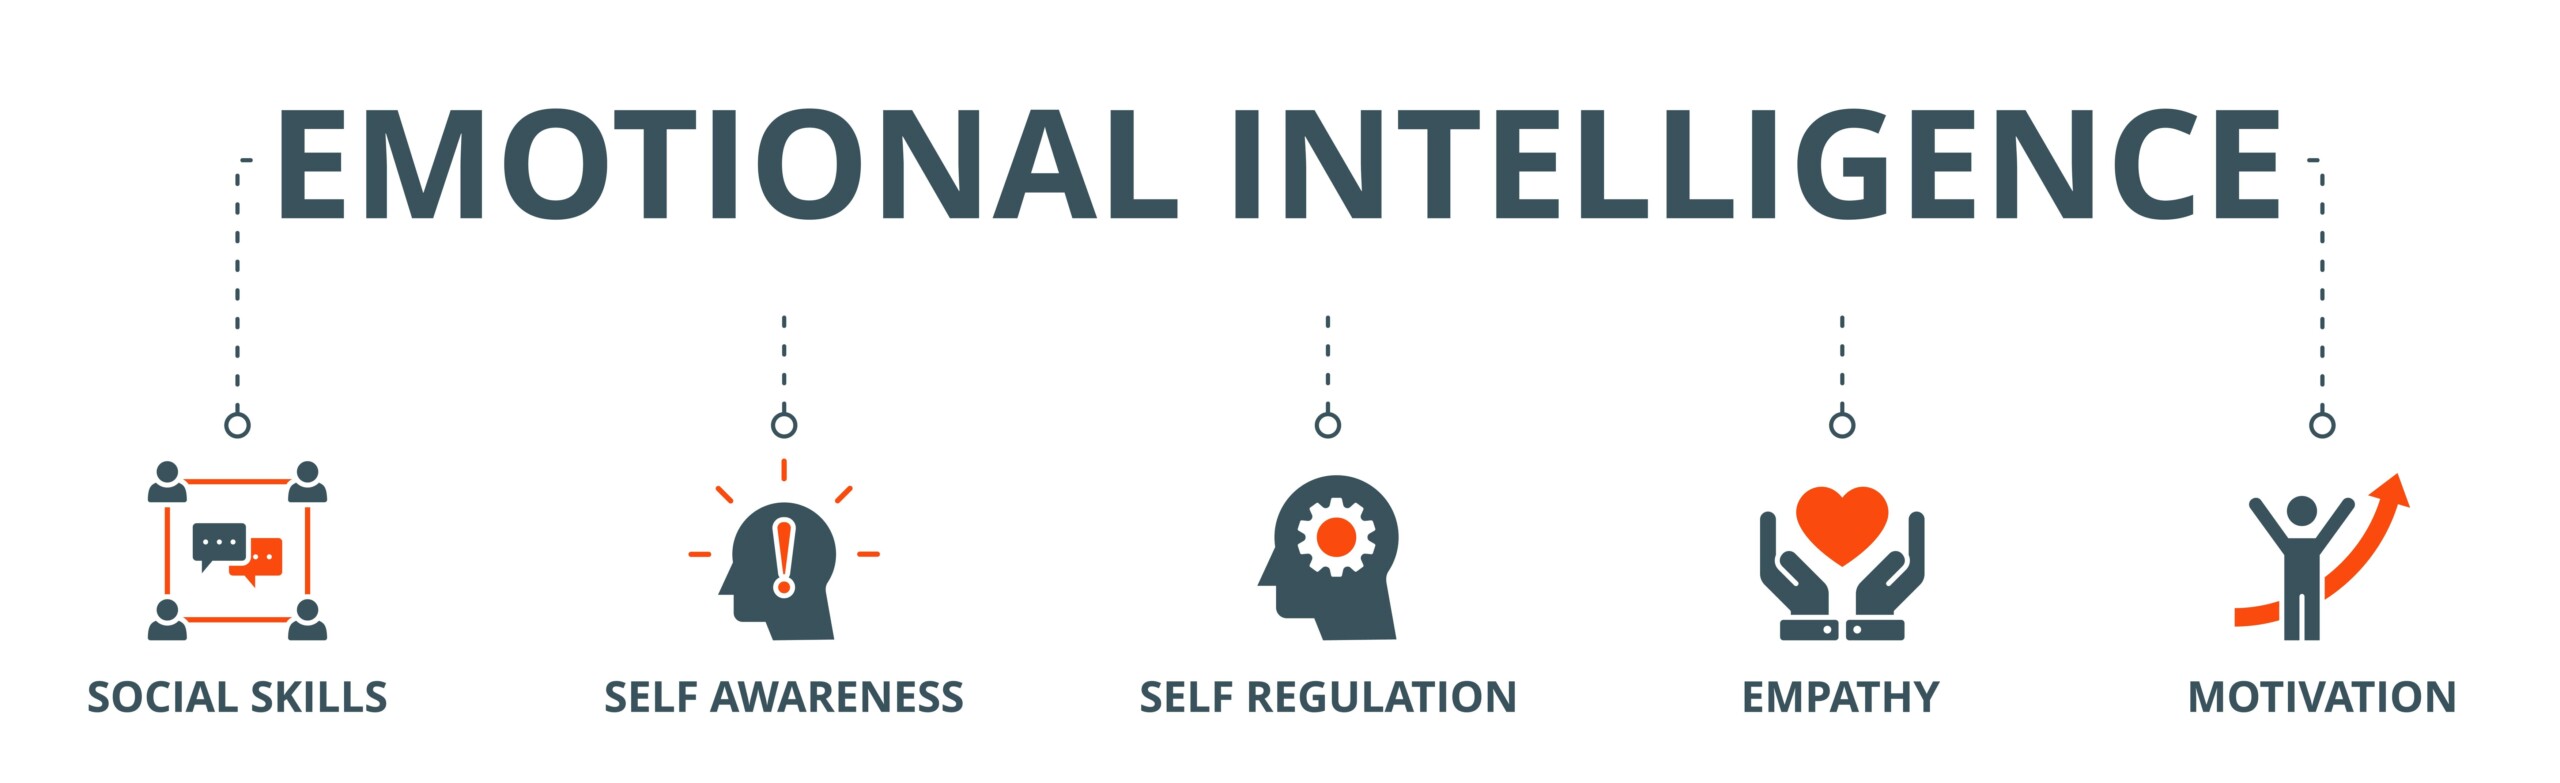 why is emotional intelligence important